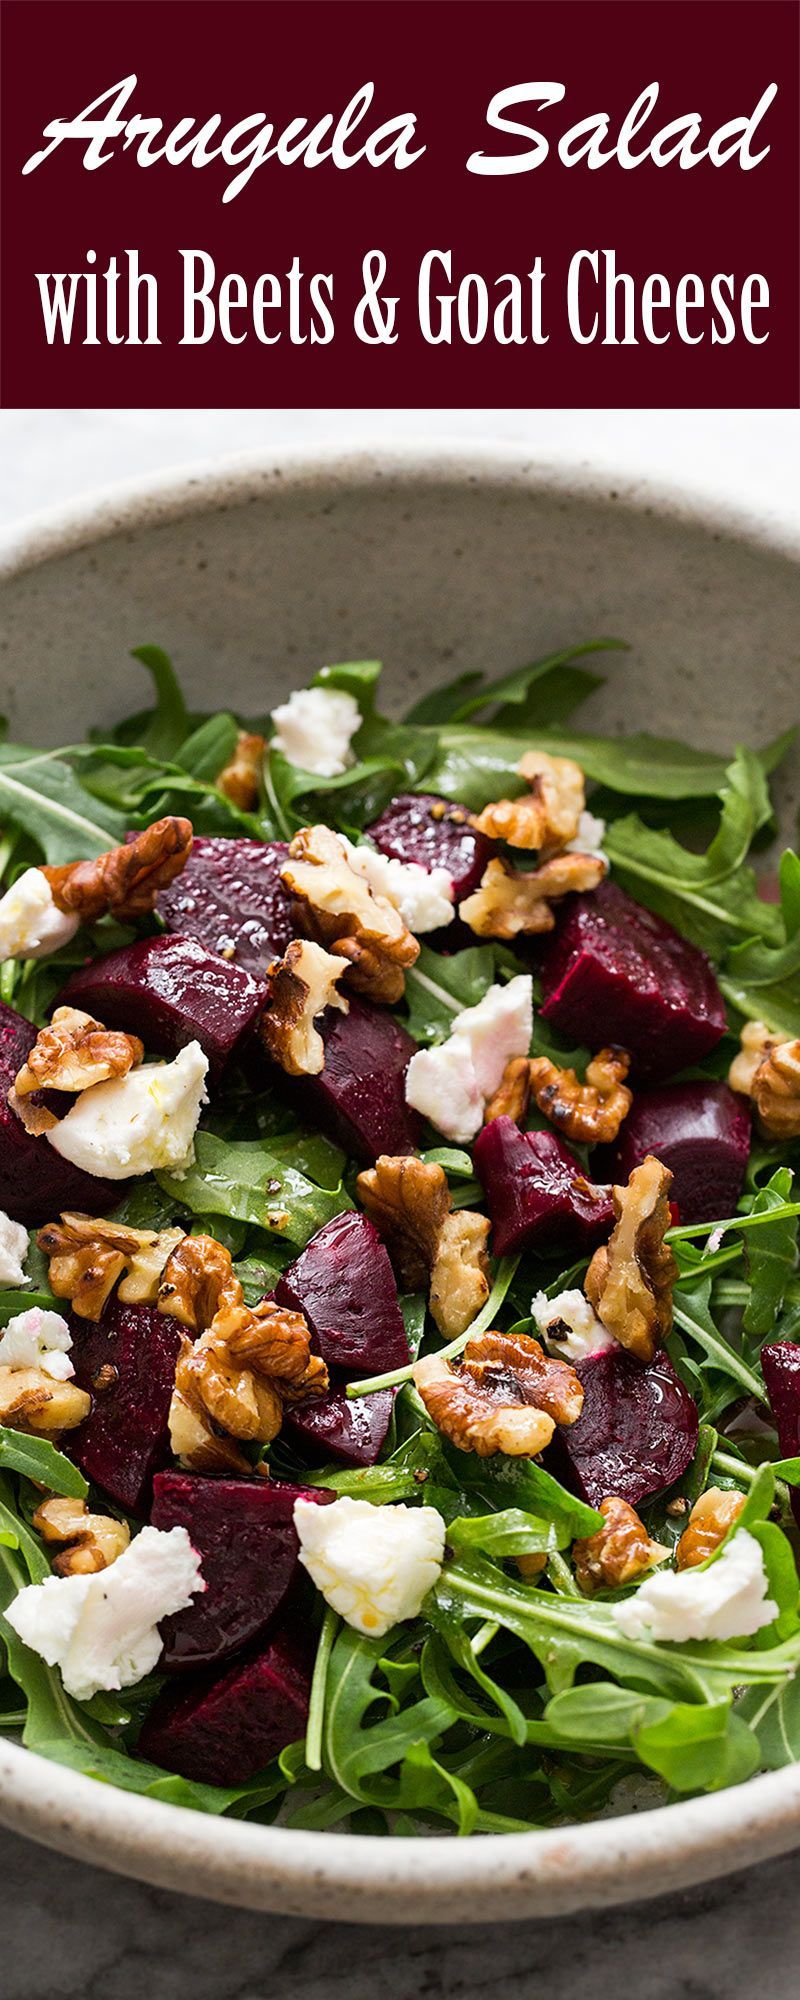 Easy, healthy, Arugula Salad with Beets, Goat Cheese, and Walnuts. With a simple lemon vinaigrette. Perfect combo!